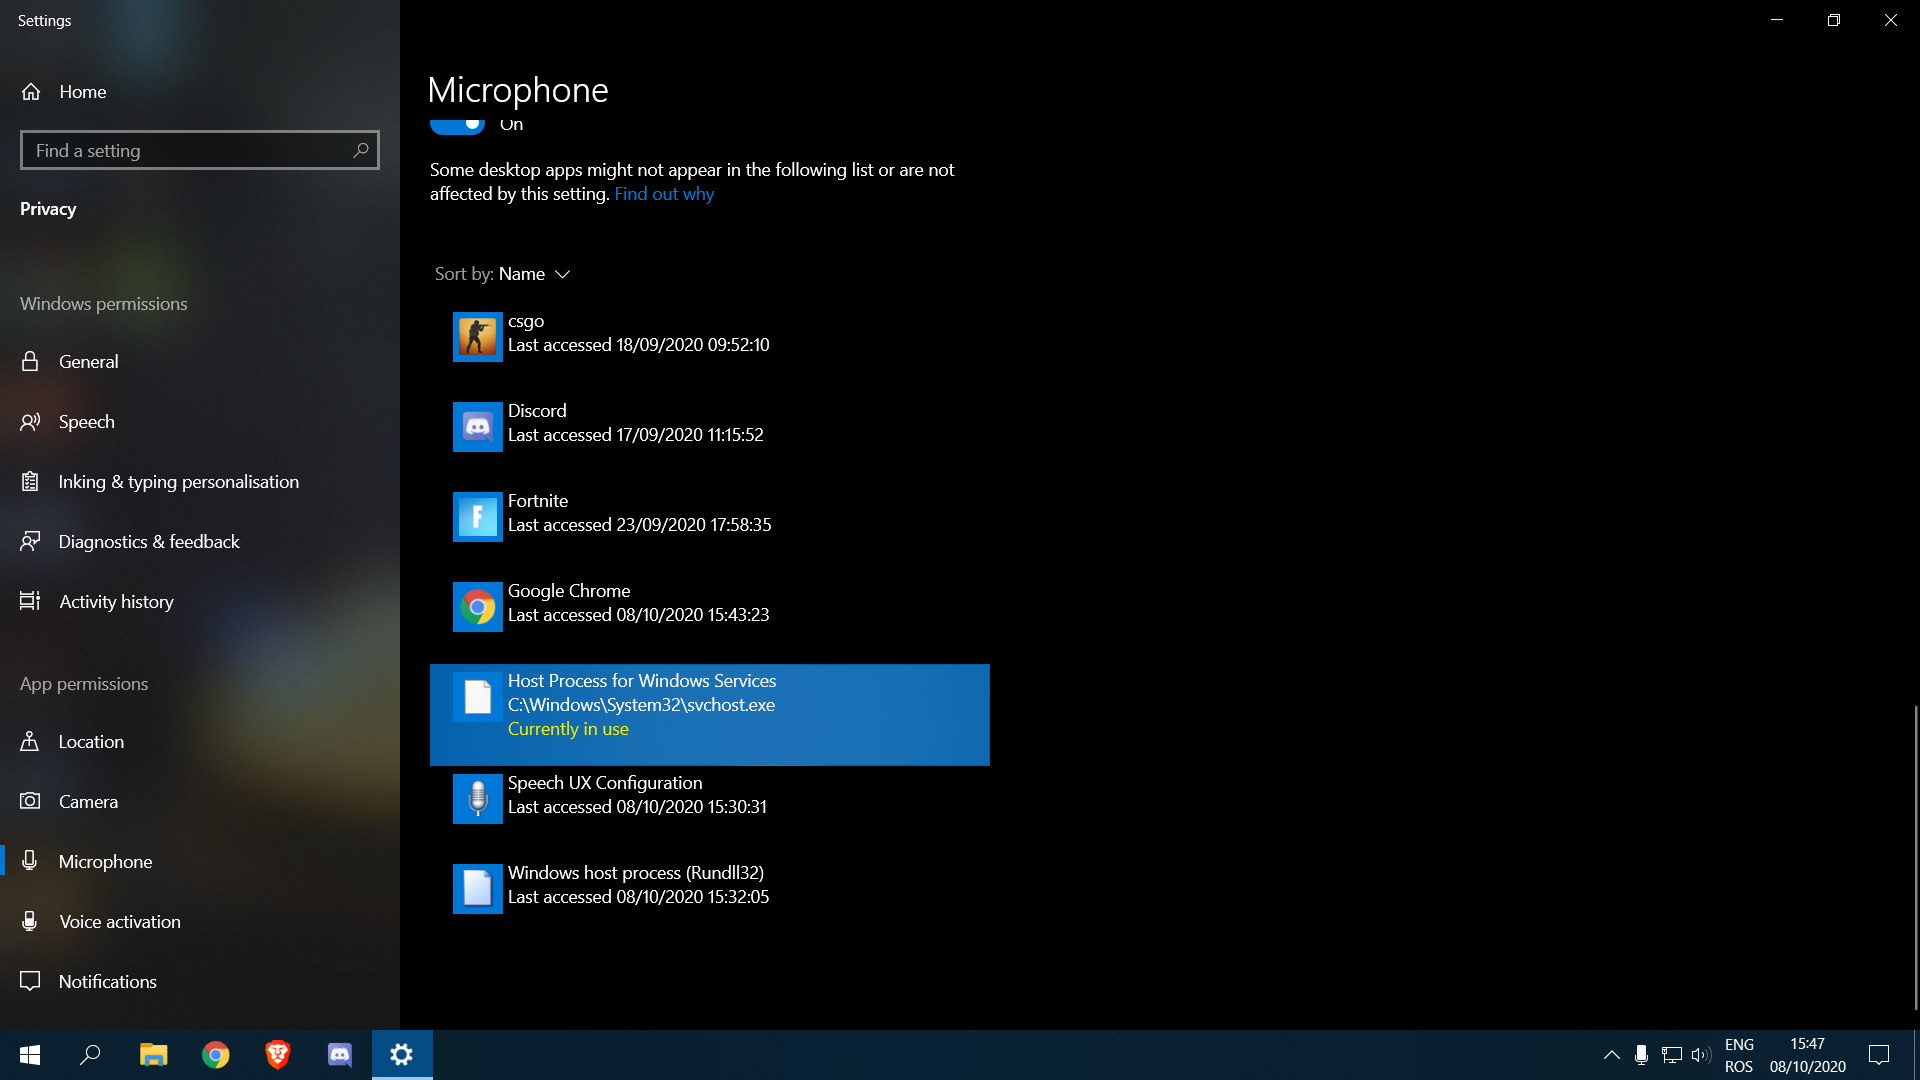 Windows Host Process for Windows Services is using my microphone all time f8f74a37-4773-4da9-8791-7e0ae0299f55?upload=true.png